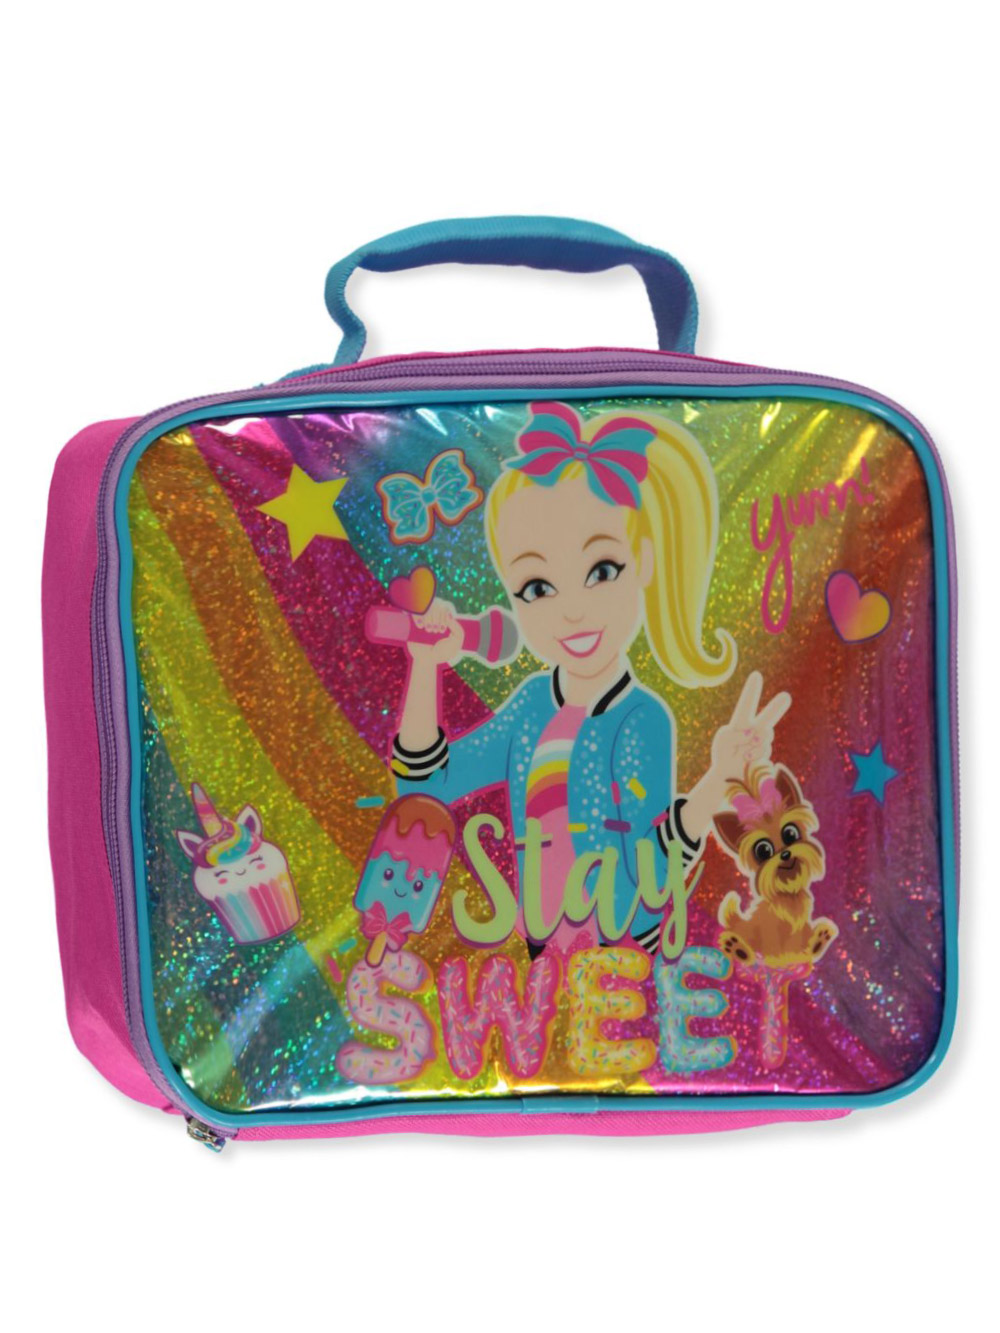 Tie Dye Lunch Box with Glitter Varsity Letter Patches - Lunch